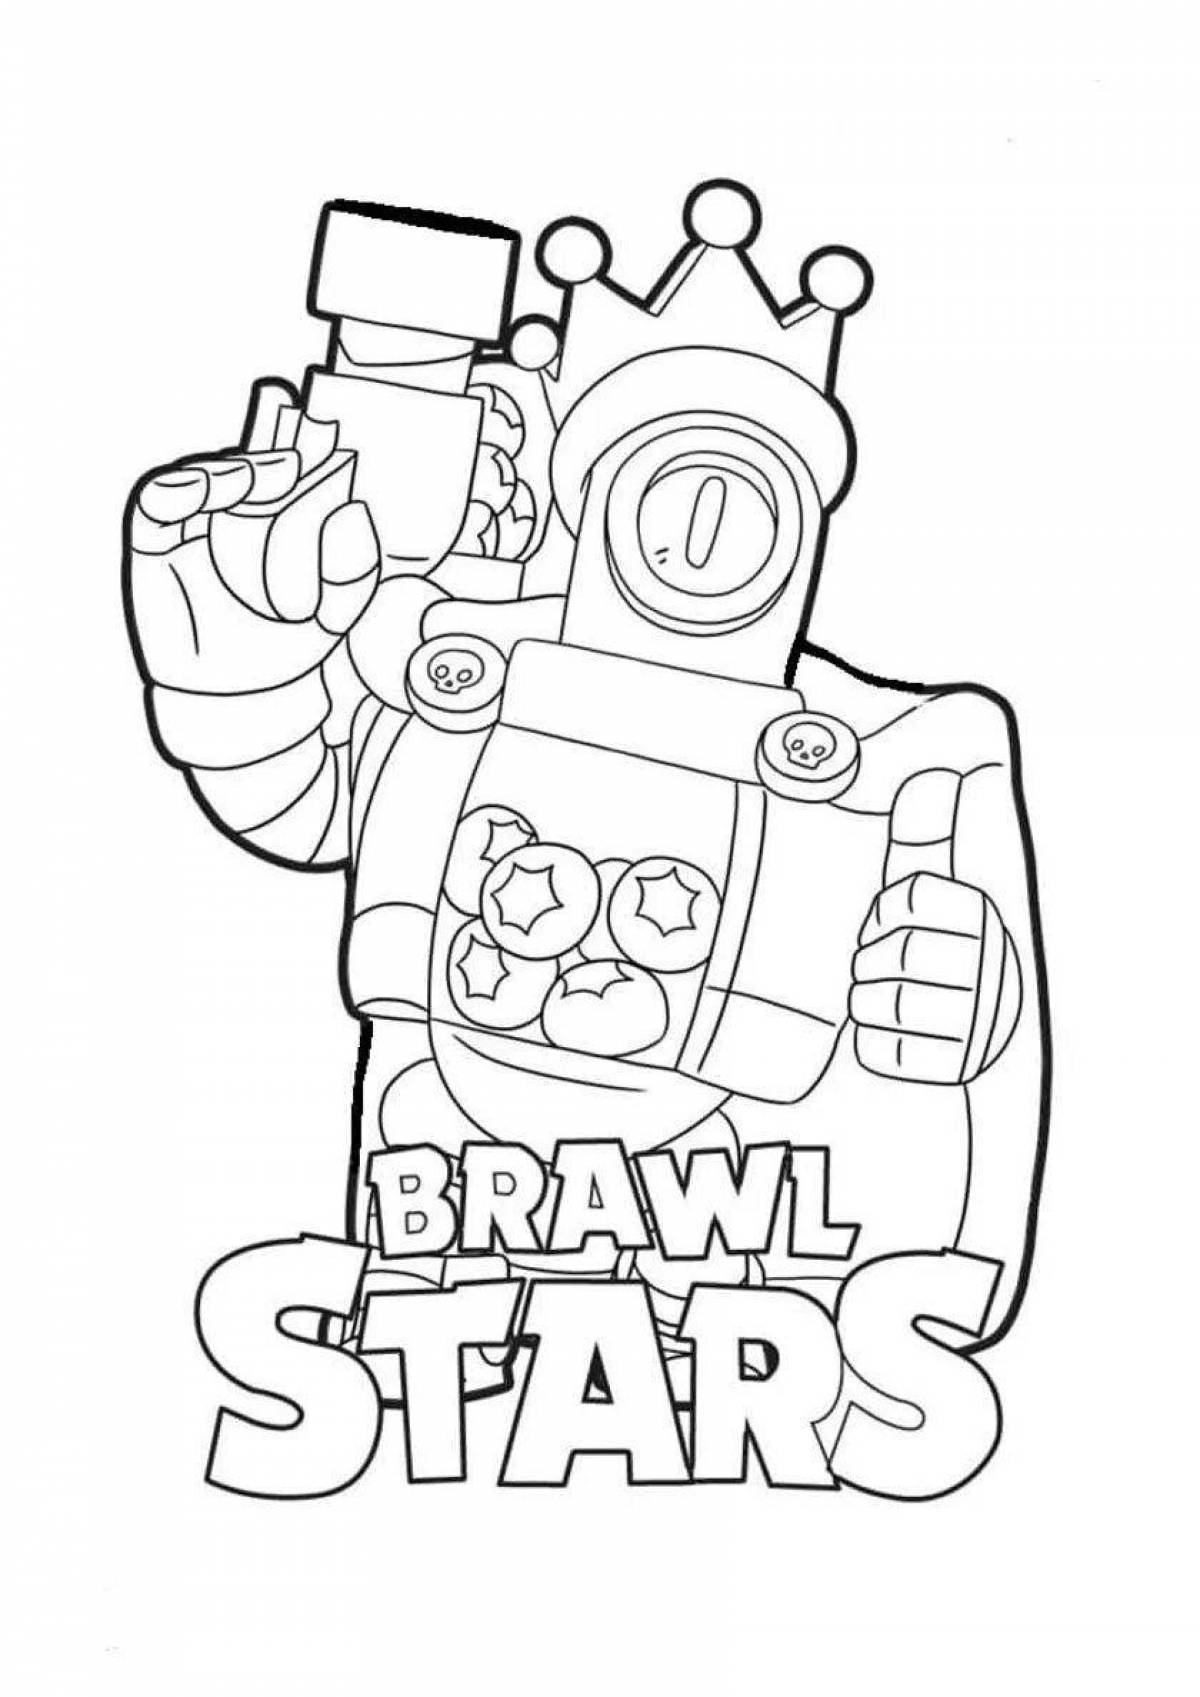 Charming buster brawl stars coloring page